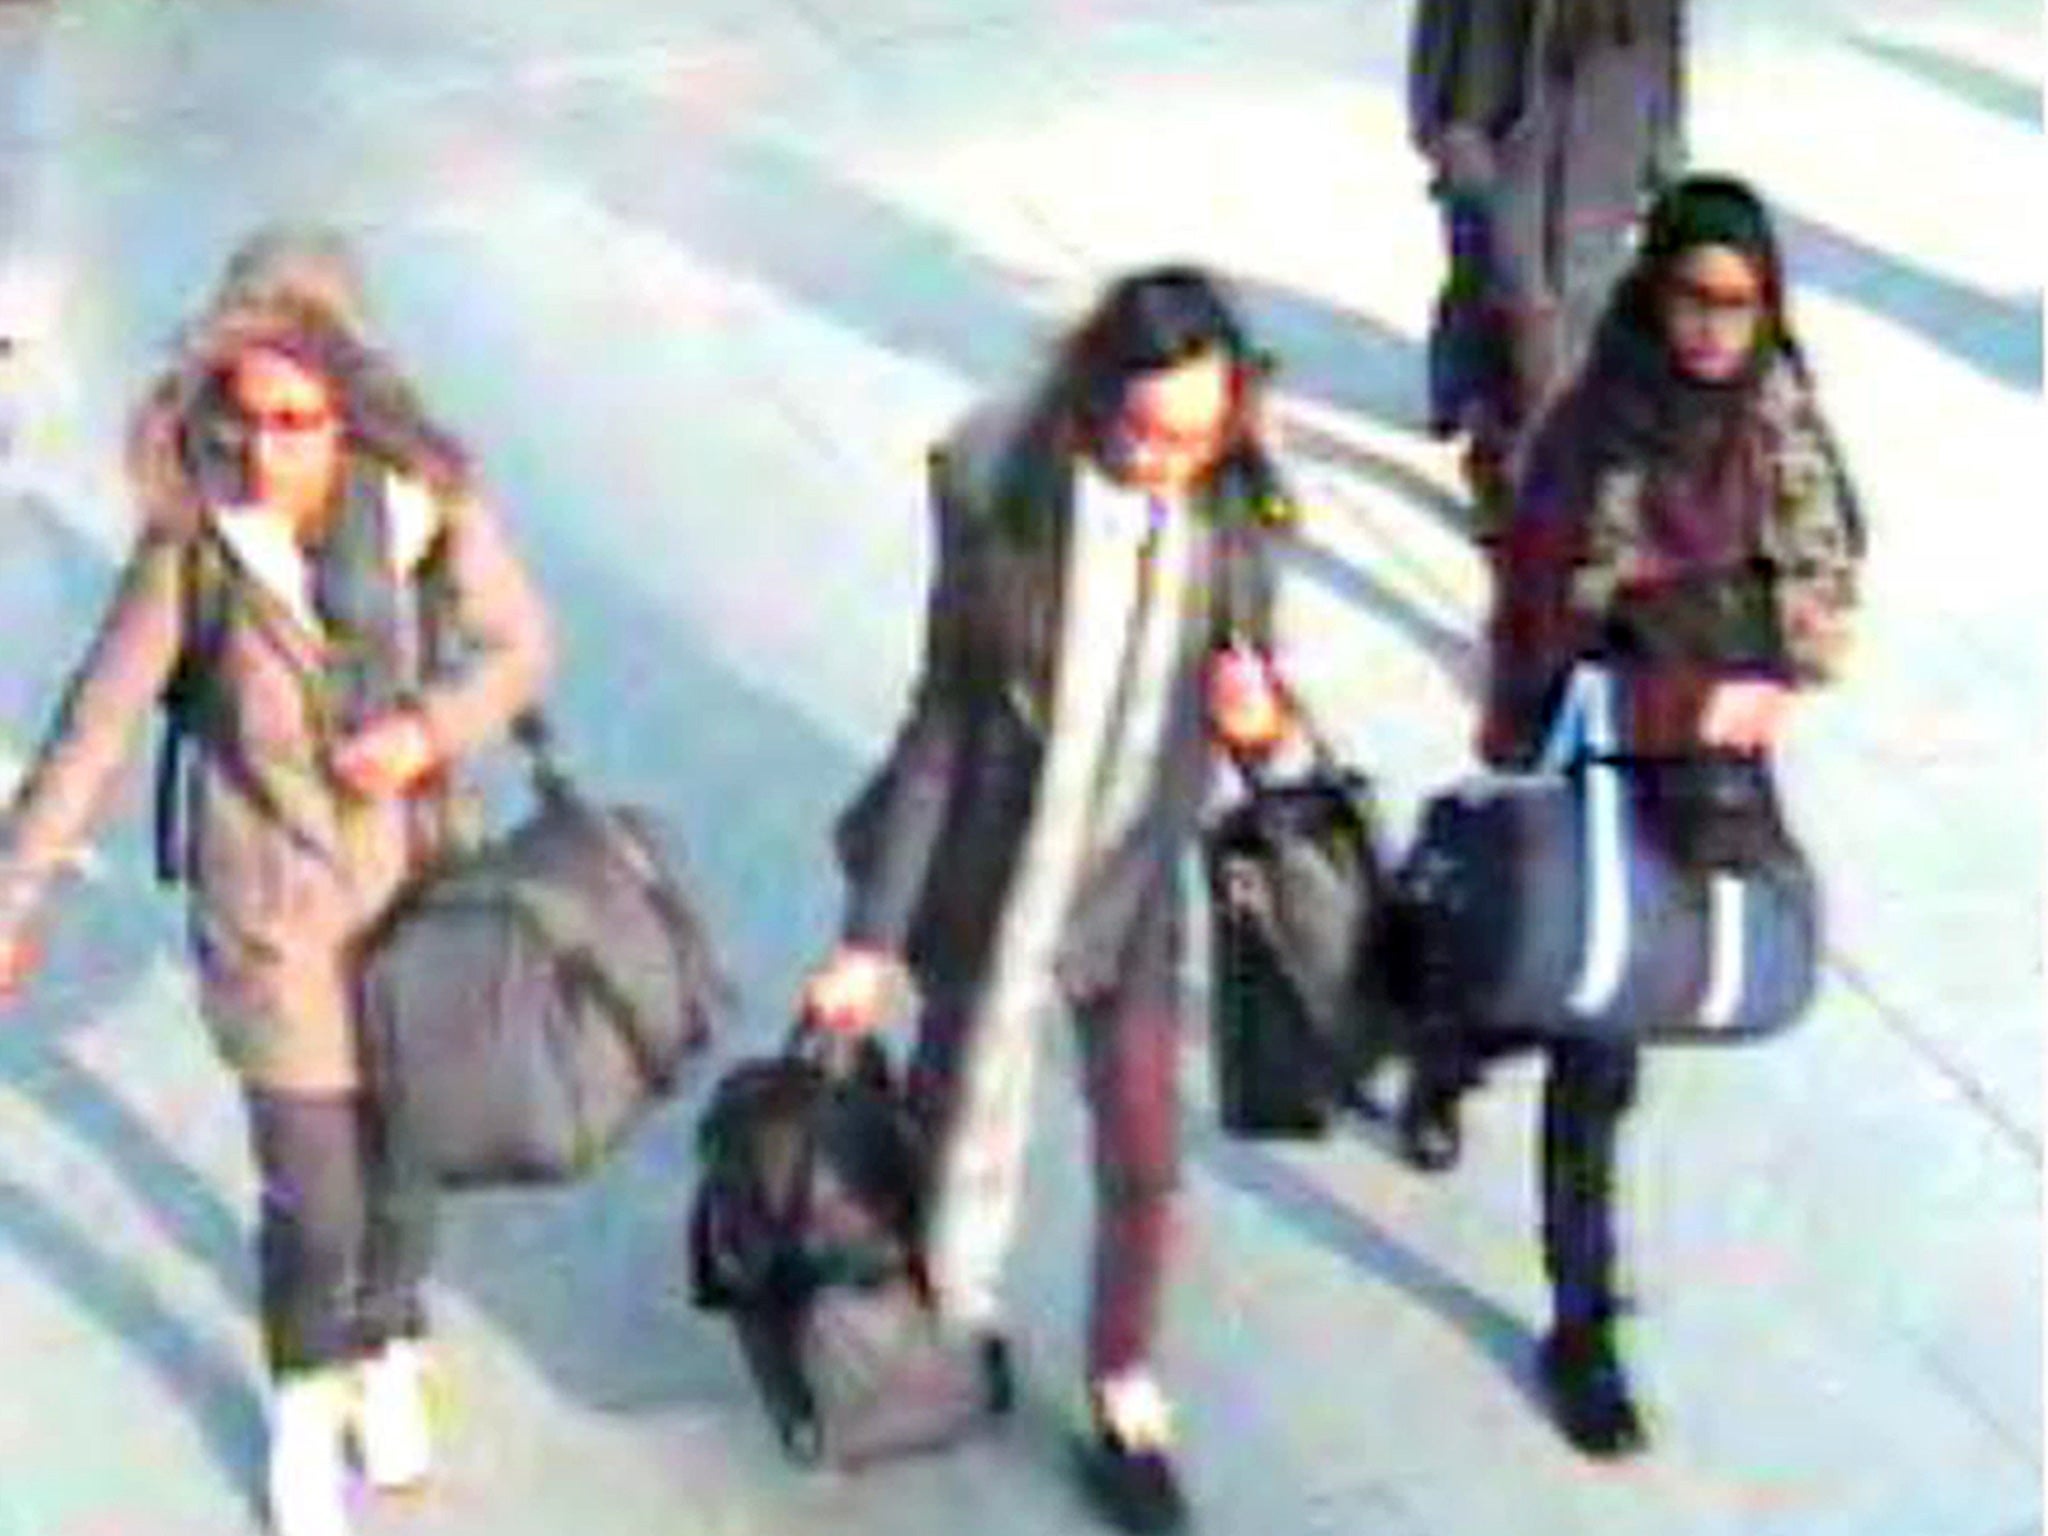 Amira Abase, Kadiza Sultana and Shamima Begum waught on CCTV at Gatwick airport on their way to Turkey in February (AP)